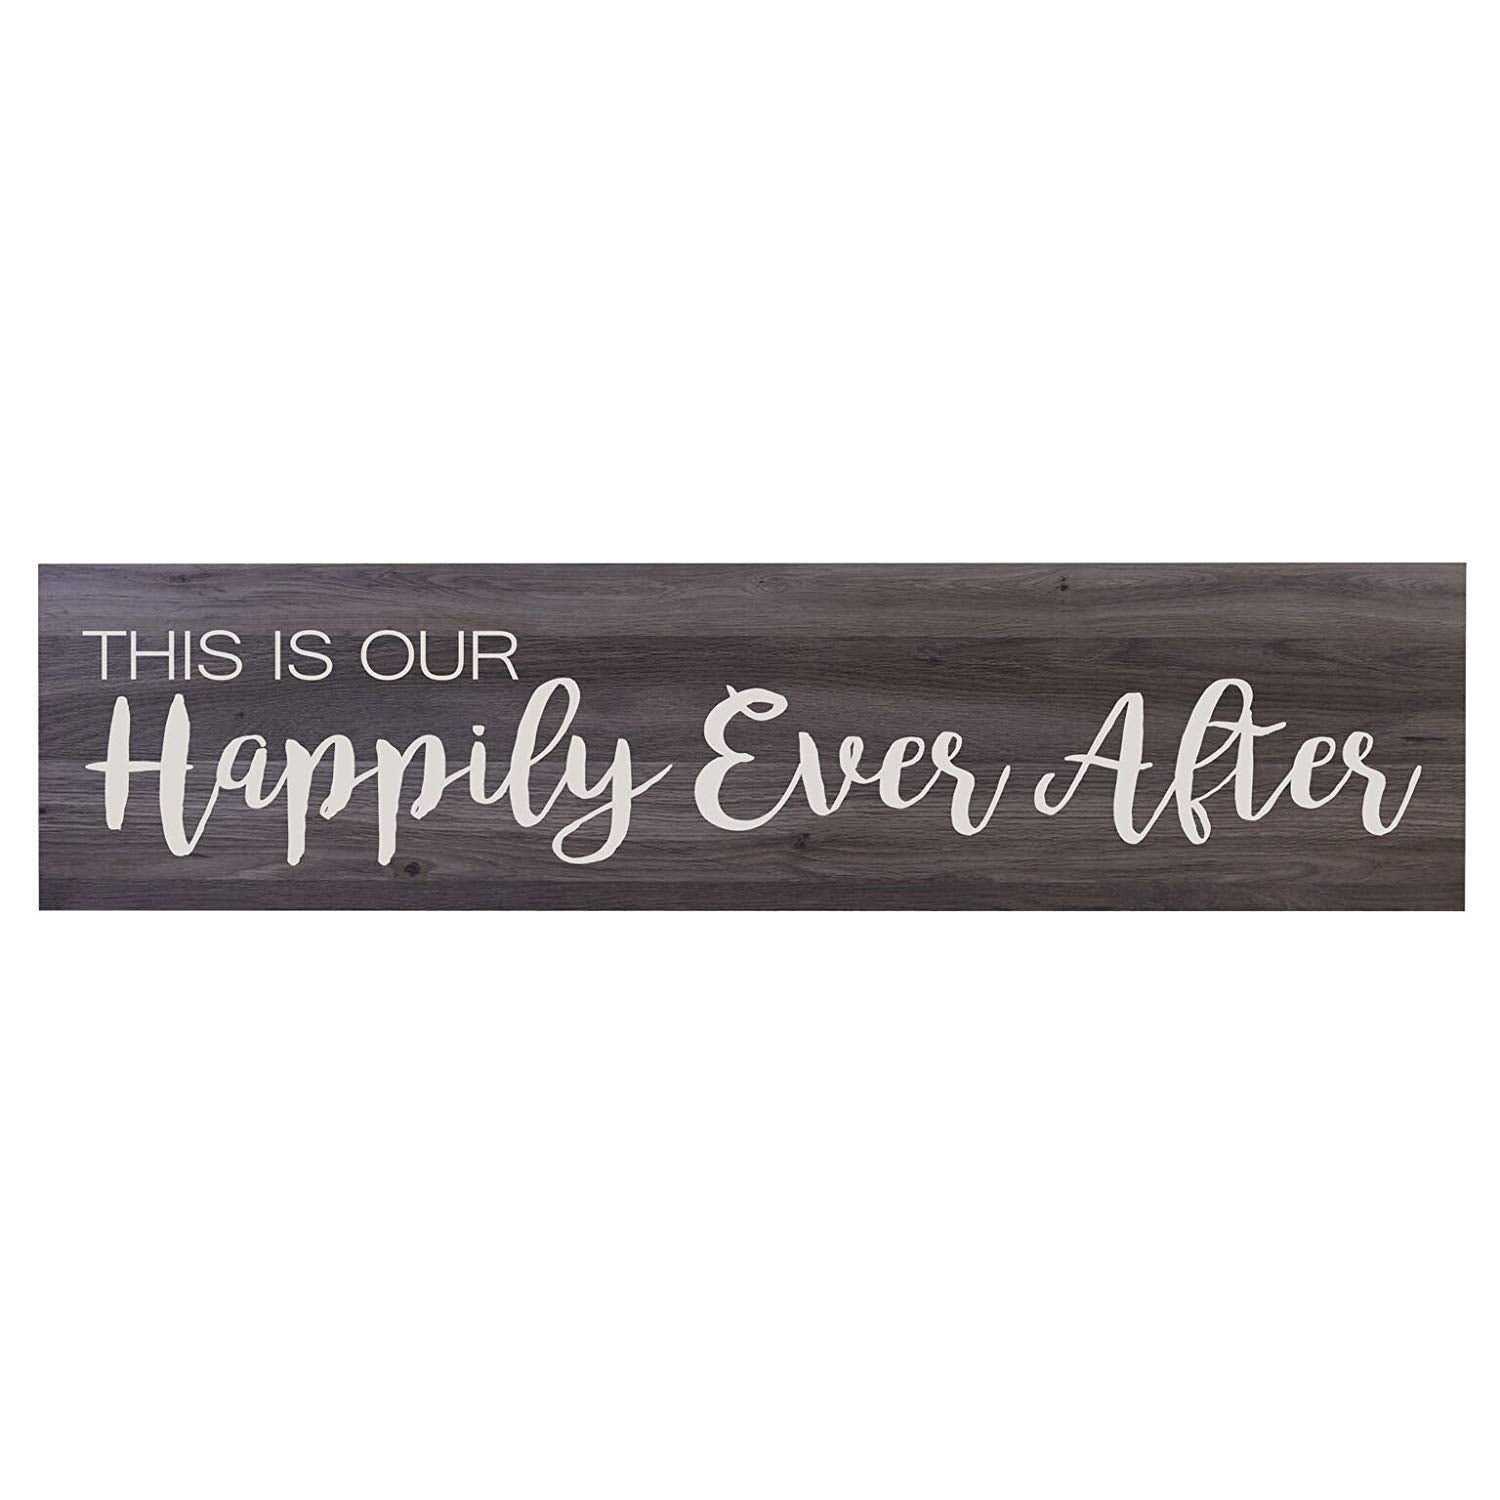 This is Our Happily Ever After Sign